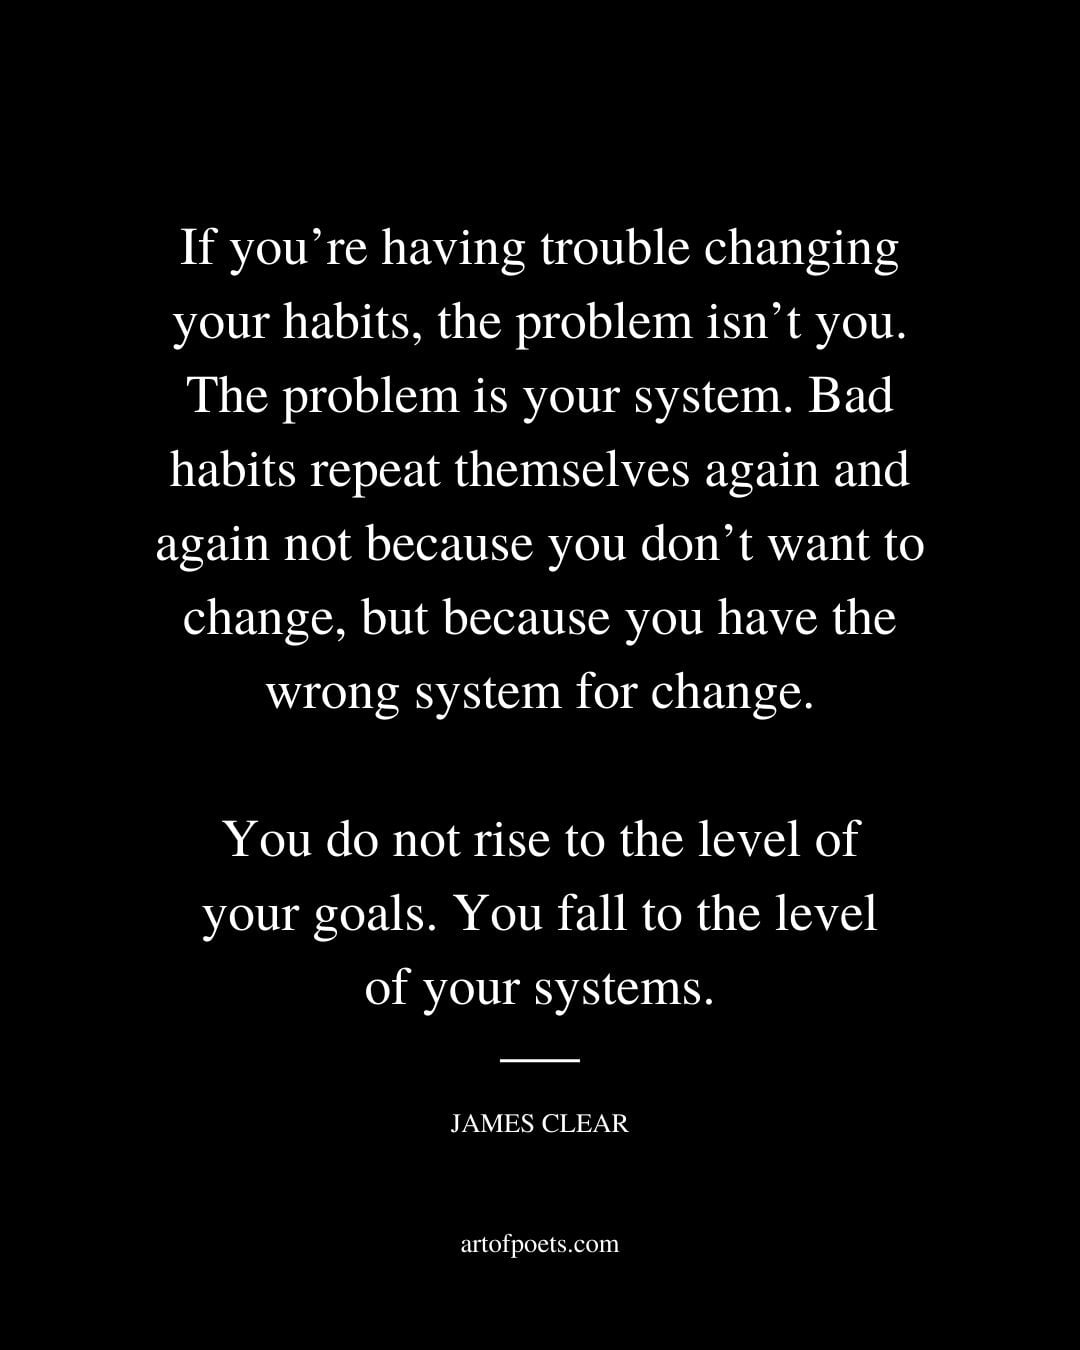 If youre having trouble changing your habits the problem isnt you. The problem is your system